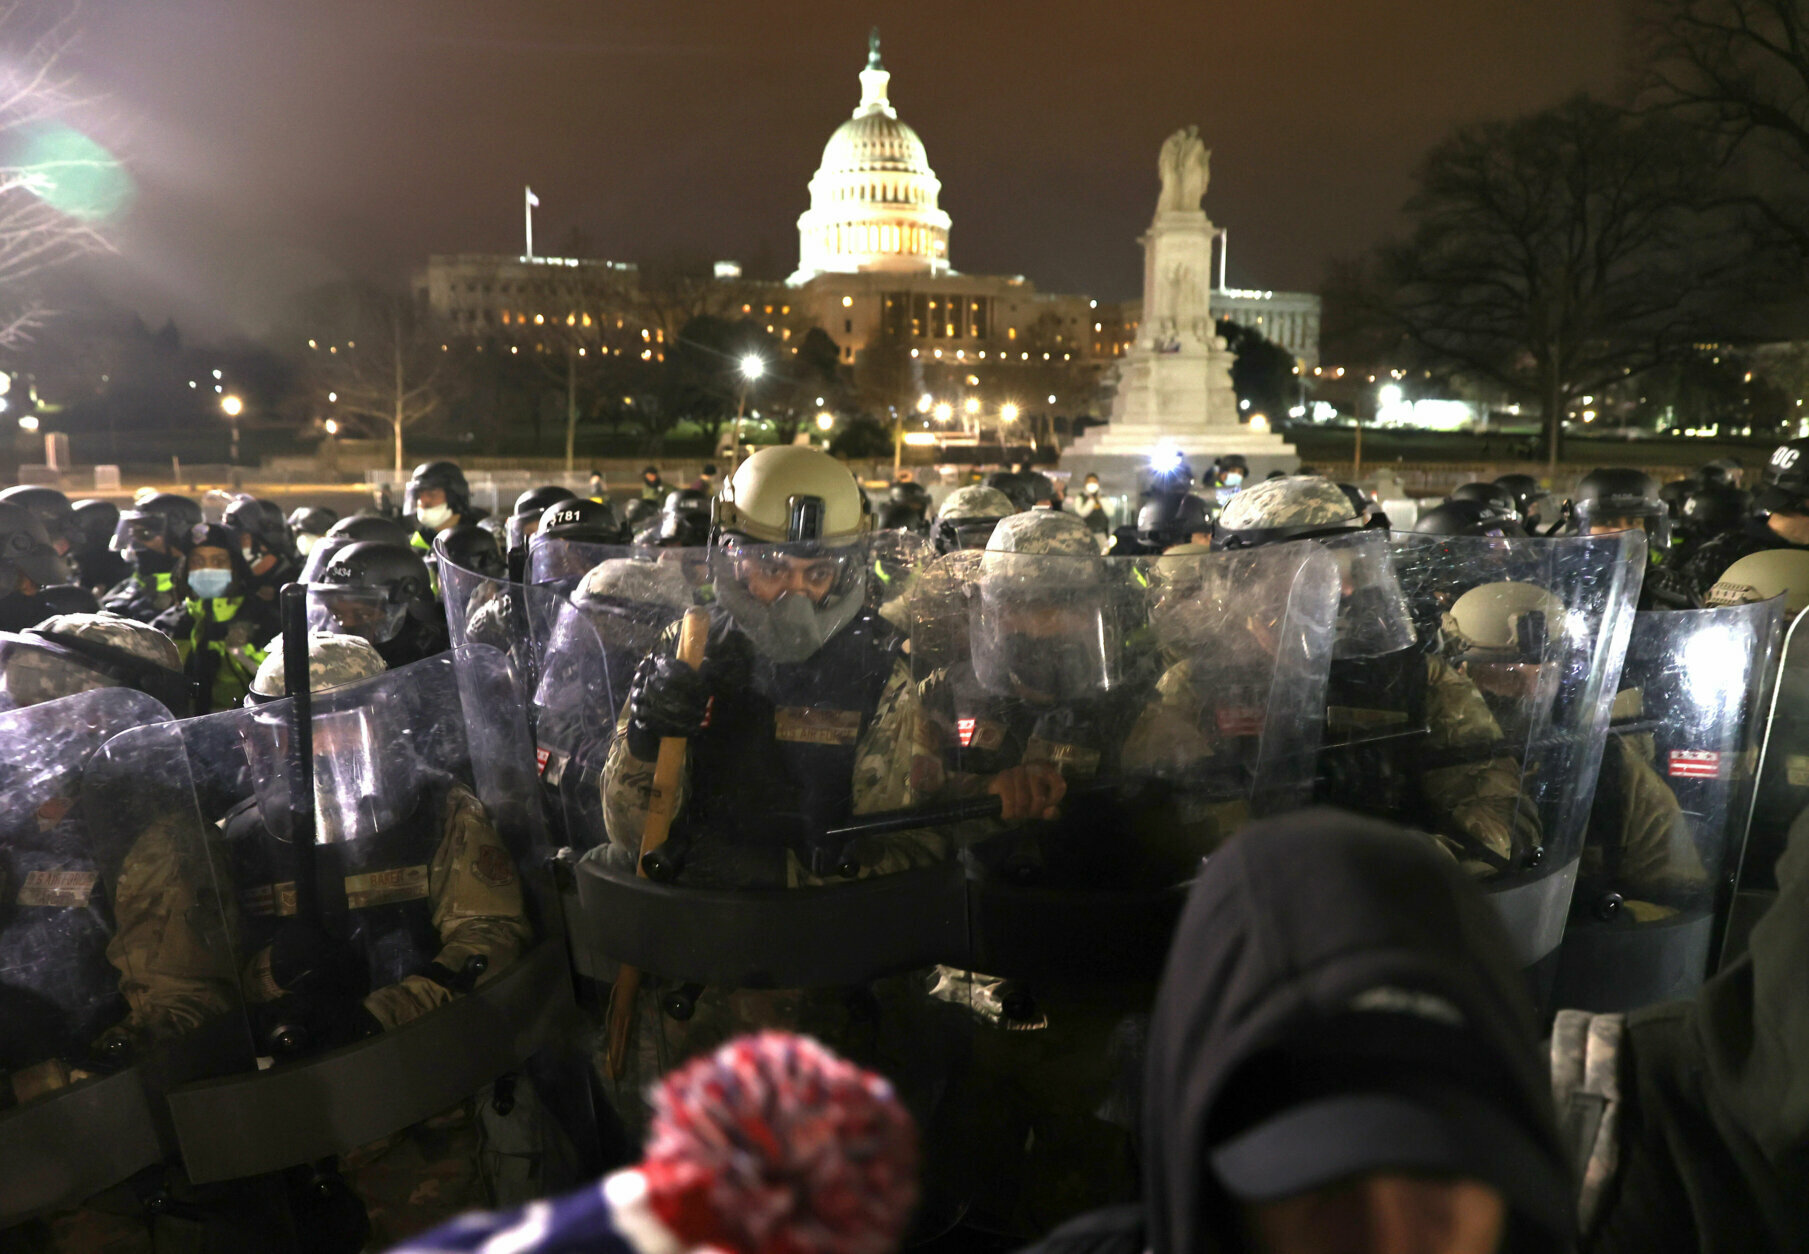 WASHINGTON, DC - JANUARY 06: Members of the National Guard assist police officers in dispersing protesters who are gathering at the U.S. Capitol Building on January 06, 2021 in Washington, DC. Pro-Trump protesters entered the U.S. Capitol building after mass demonstrations in the nation's capital during a joint session Congress to ratify President-elect Joe Biden's 306-232 Electoral College win over President Donald Trump. (Photo by Tasos Katopodis/Getty Images)